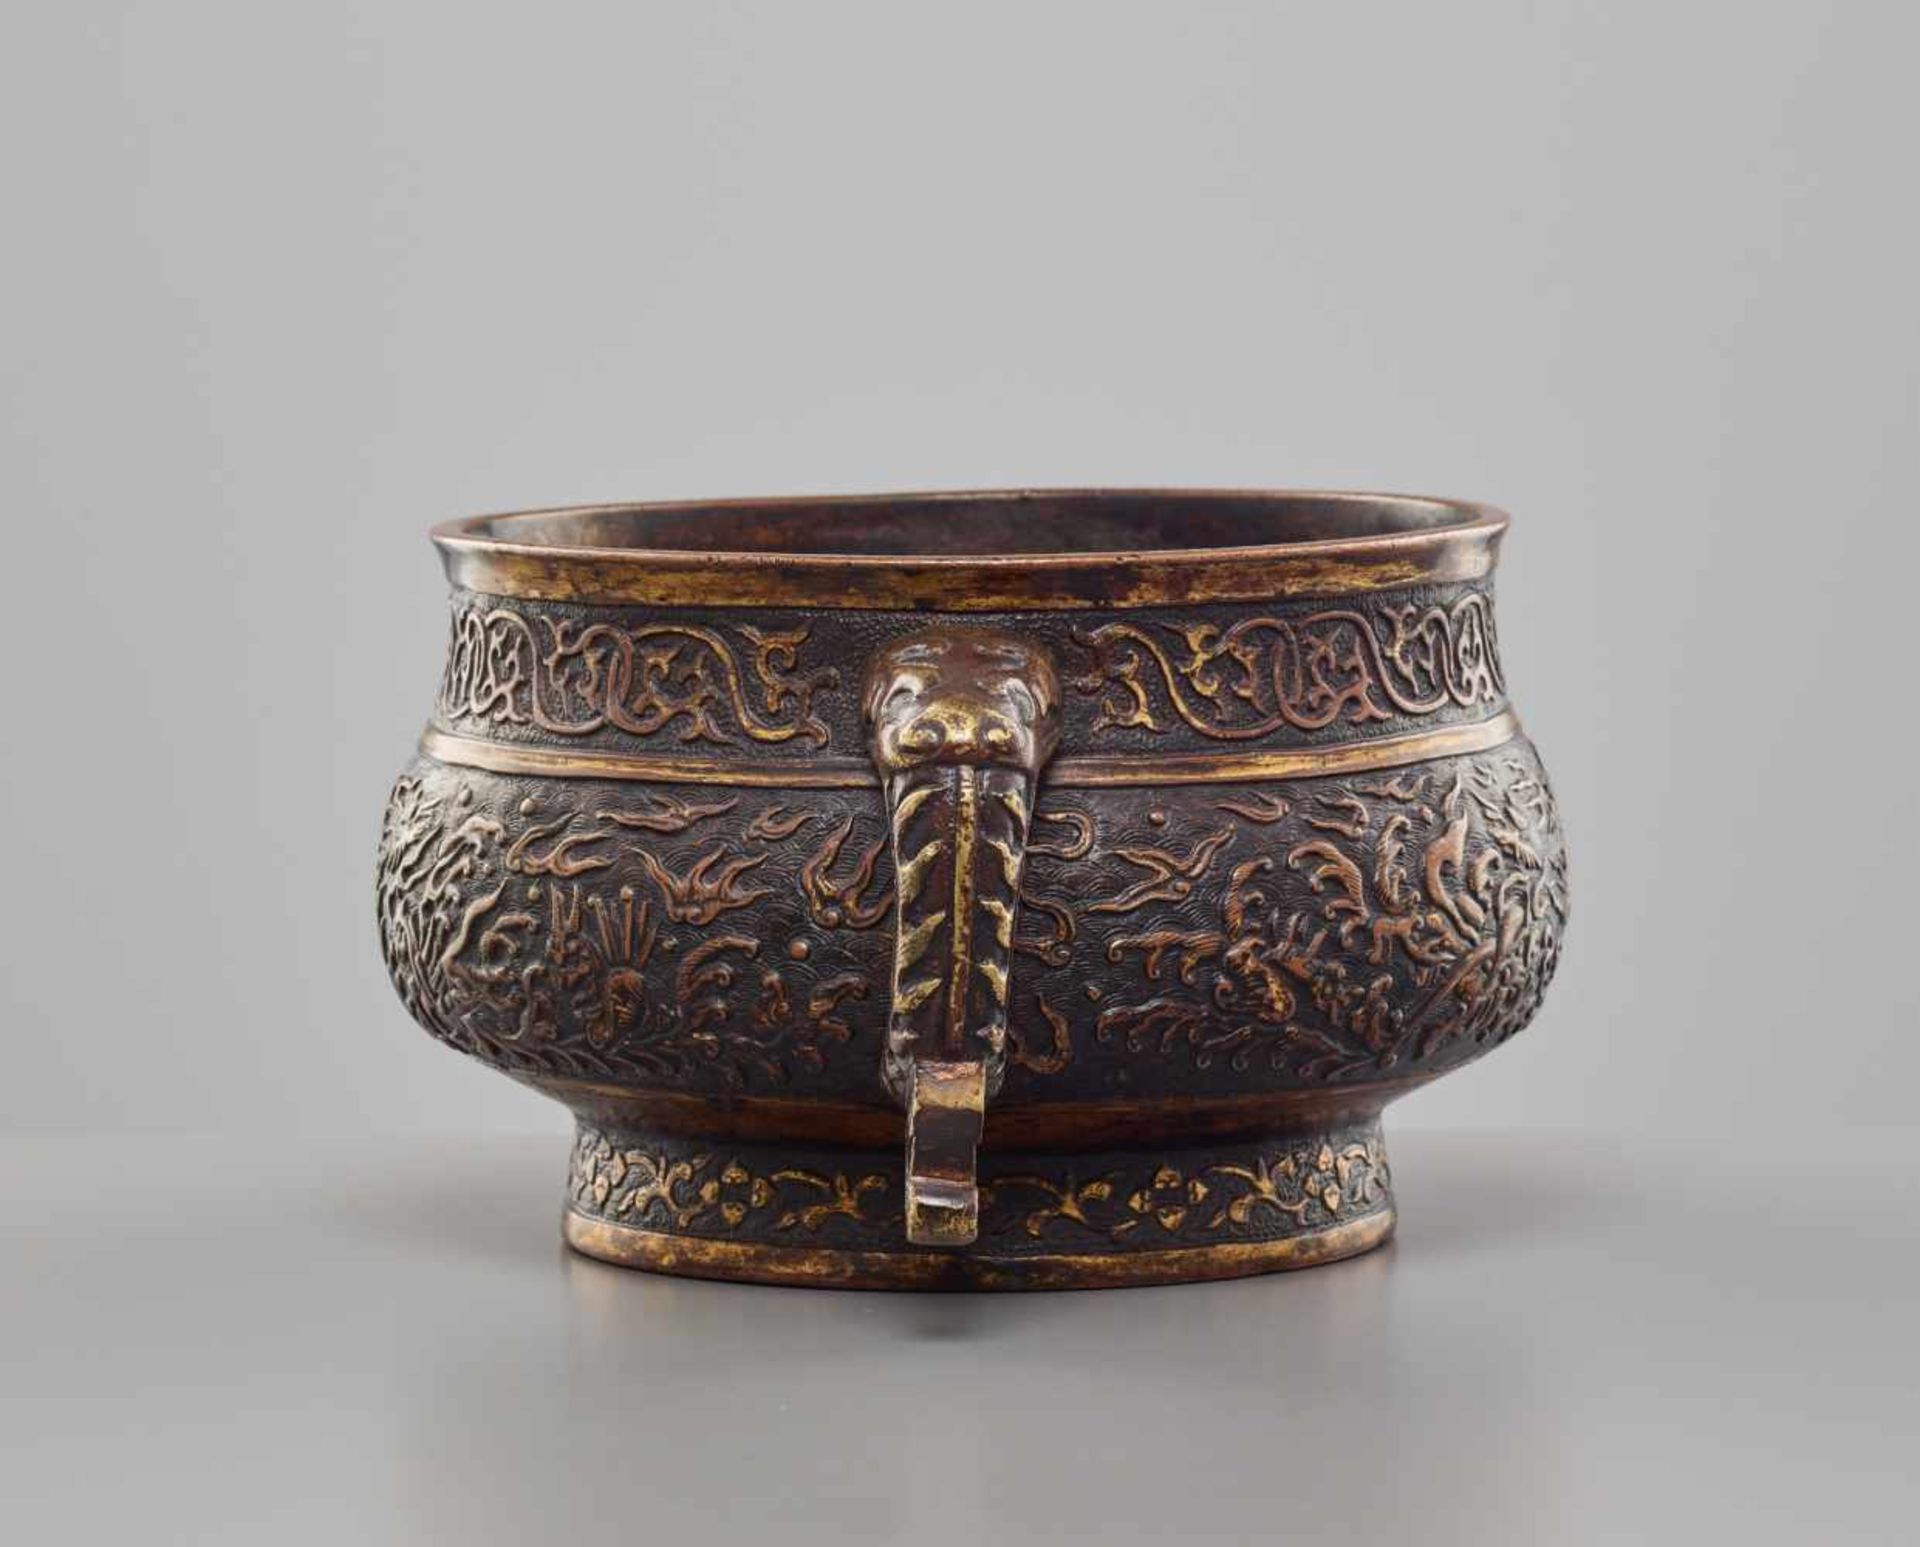 A LARGE PARCEL-GILT BRONZE CENSER, GUI, WANLI PERIOD, HU WENMING MARK THIS LOT IS PUBLISHED in - Image 6 of 13